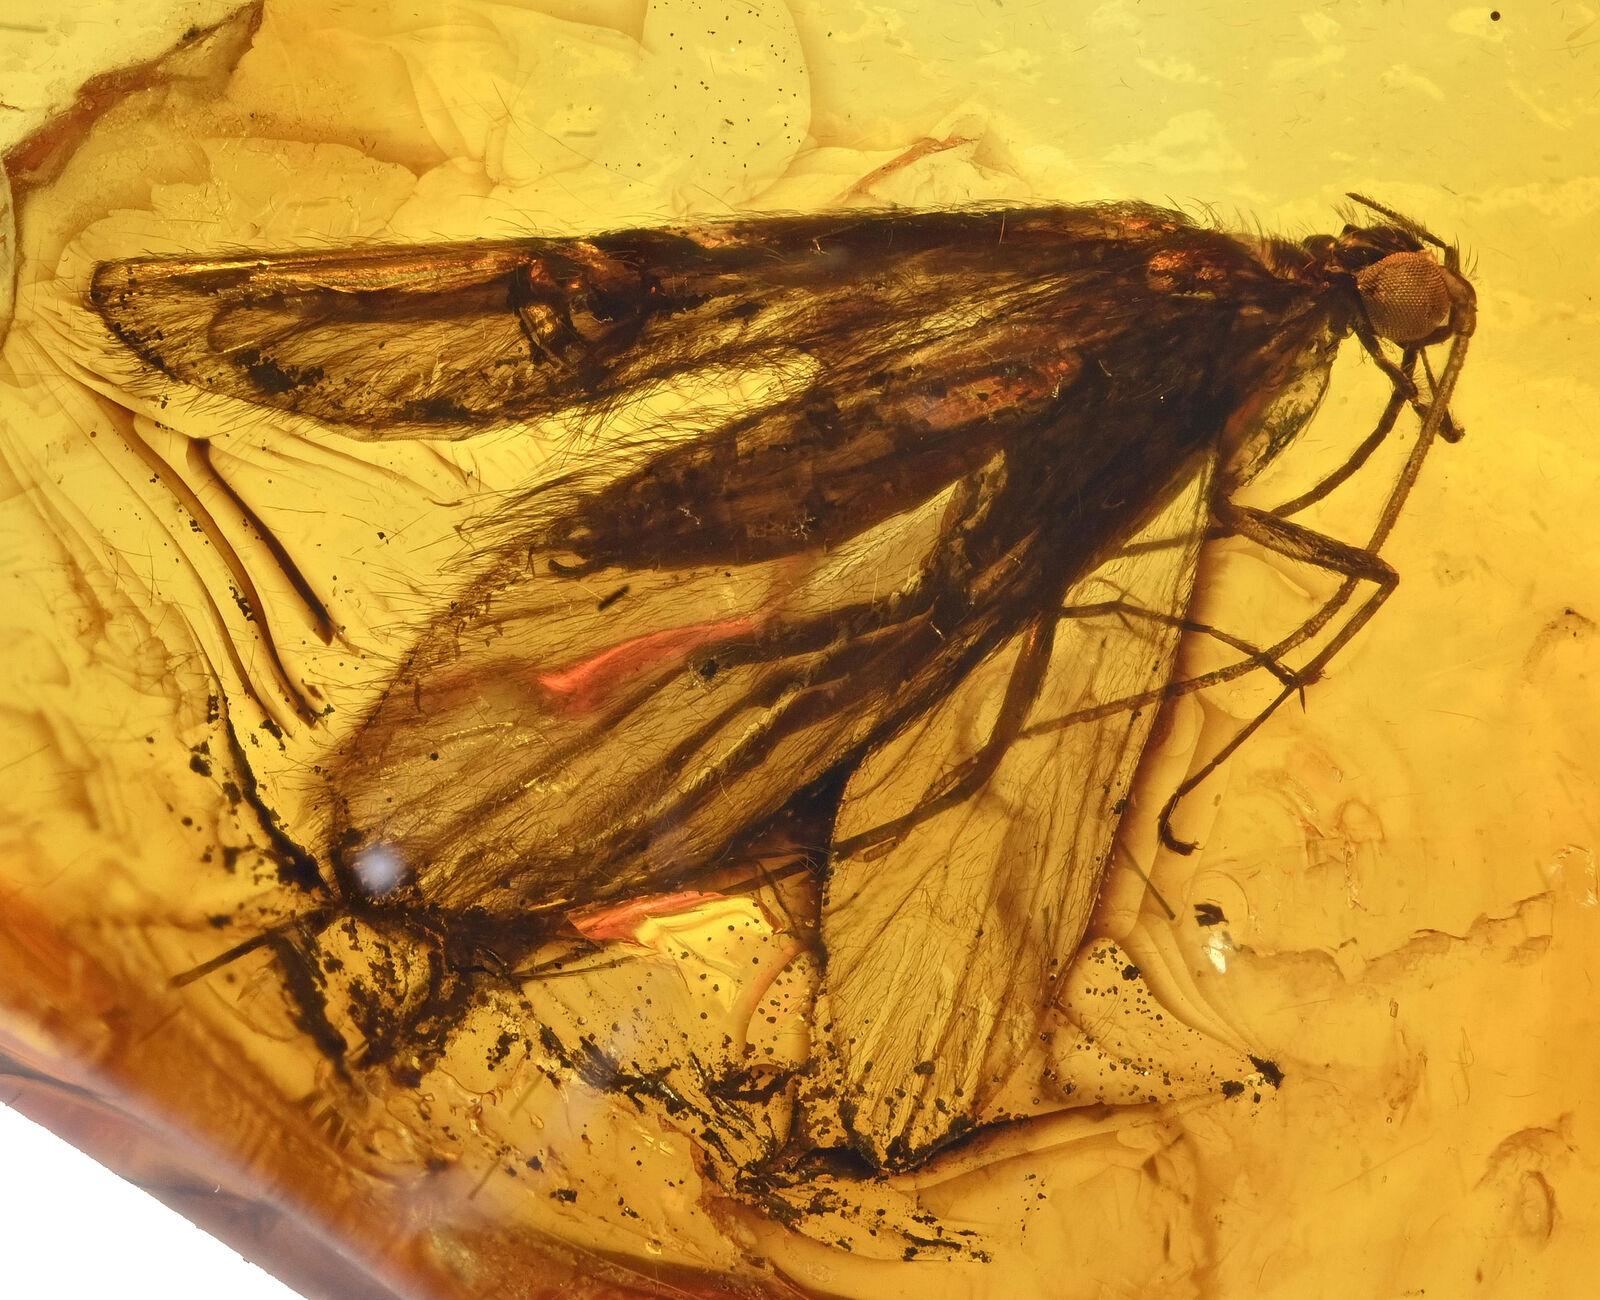 Detailed Trichoptera (Caddisfly), Fossil inclusion in Baltic Amber